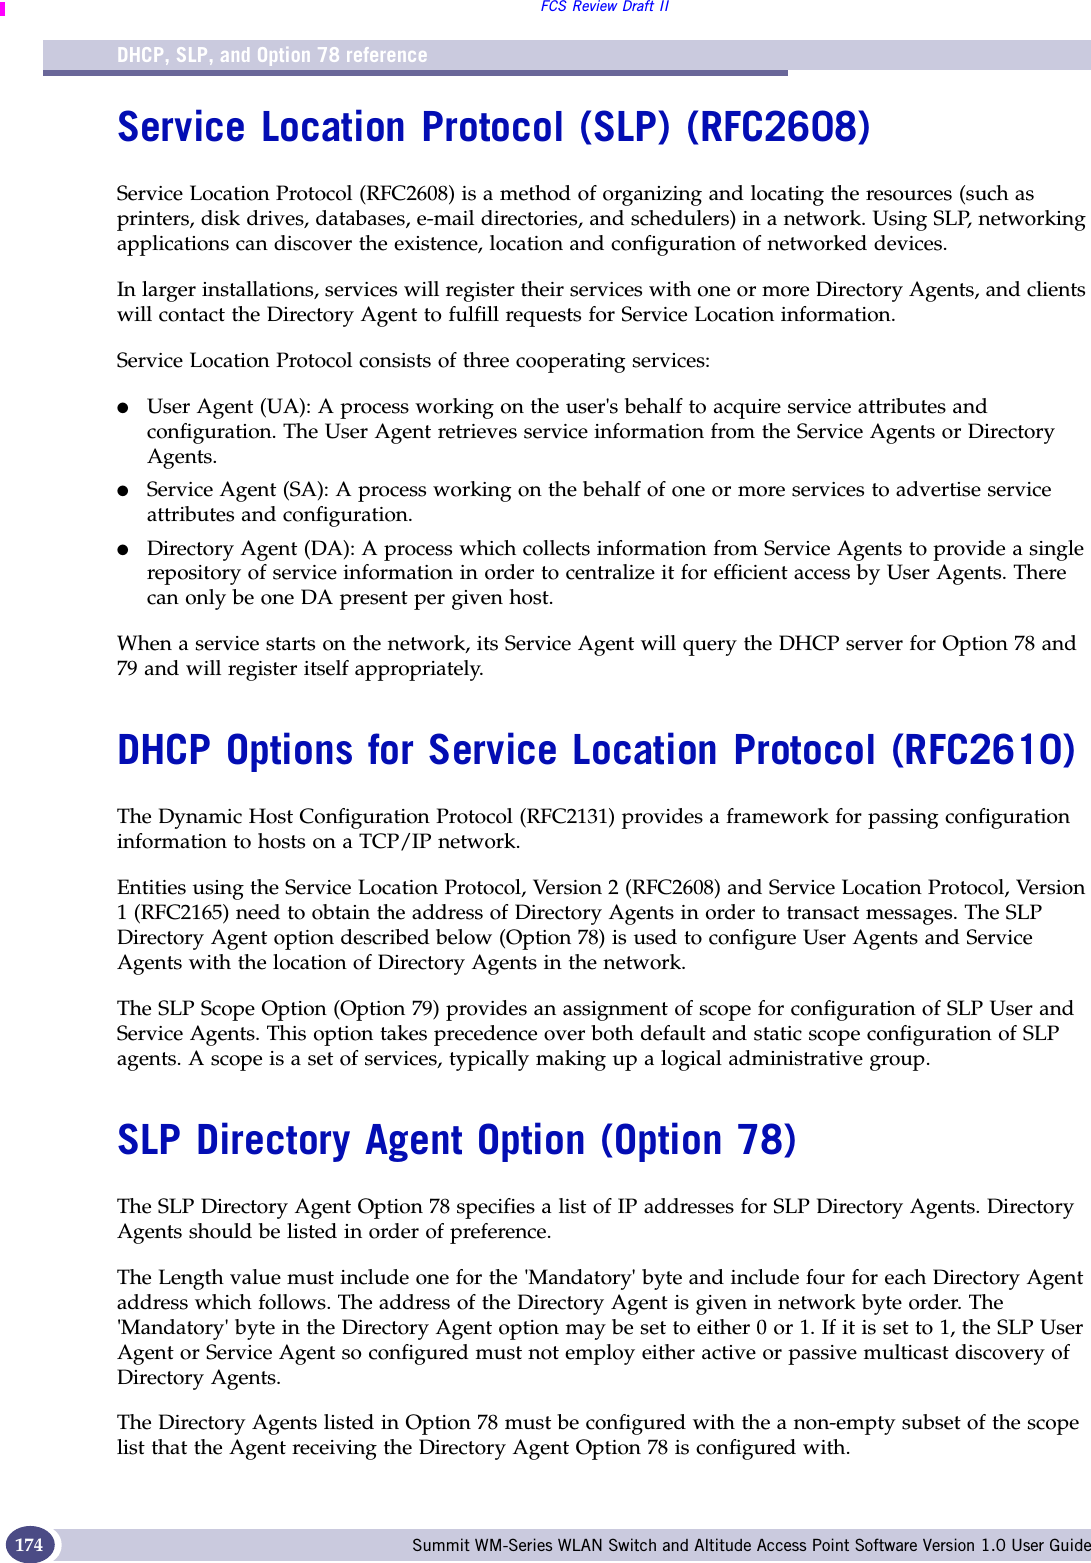 DHCP, SLP, and Option 78 referenceFCS Review Draft IISummit WM-Series WLAN Switch and Altitude Access Point Software Version 1.0 User Guide174Service Location Protocol (SLP) (RFC2608)Service Location Protocol (RFC2608) is a method of organizing and locating the resources (such as printers, disk drives, databases, e-mail directories, and schedulers) in a network. Using SLP, networking applications can discover the existence, location and configuration of networked devices.In larger installations, services will register their services with one or more Directory Agents, and clients will contact the Directory Agent to fulfill requests for Service Location information.Service Location Protocol consists of three cooperating services:●User Agent (UA): A process working on the user&apos;s behalf to acquire service attributes and configuration. The User Agent retrieves service information from the Service Agents or Directory Agents.●Service Agent (SA): A process working on the behalf of one or more services to advertise service attributes and configuration.●Directory Agent (DA): A process which collects information from Service Agents to provide a single repository of service information in order to centralize it for efficient access by User Agents. There can only be one DA present per given host.When a service starts on the network, its Service Agent will query the DHCP server for Option 78 and 79 and will register itself appropriately.DHCP Options for Service Location Protocol (RFC2610)The Dynamic Host Configuration Protocol (RFC2131) provides a framework for passing configuration information to hosts on a TCP/IP network. Entities using the Service Location Protocol, Version 2 (RFC2608) and Service Location Protocol, Version 1 (RFC2165) need to obtain the address of Directory Agents in order to transact messages. The SLP Directory Agent option described below (Option 78) is used to configure User Agents and Service Agents with the location of Directory Agents in the network.The SLP Scope Option (Option 79) provides an assignment of scope for configuration of SLP User and Service Agents. This option takes precedence over both default and static scope configuration of SLP agents. A scope is a set of services, typically making up a logical administrative group.SLP Directory Agent Option (Option 78)The SLP Directory Agent Option 78 specifies a list of IP addresses for SLP Directory Agents. Directory Agents should be listed in order of preference.The Length value must include one for the &apos;Mandatory&apos; byte and include four for each Directory Agent address which follows. The address of the Directory Agent is given in network byte order. The &apos;Mandatory&apos; byte in the Directory Agent option may be set to either 0 or 1. If it is set to 1, the SLP User Agent or Service Agent so configured must not employ either active or passive multicast discovery of Directory Agents.The Directory Agents listed in Option 78 must be configured with the a non-empty subset of the scope list that the Agent receiving the Directory Agent Option 78 is configured with. 